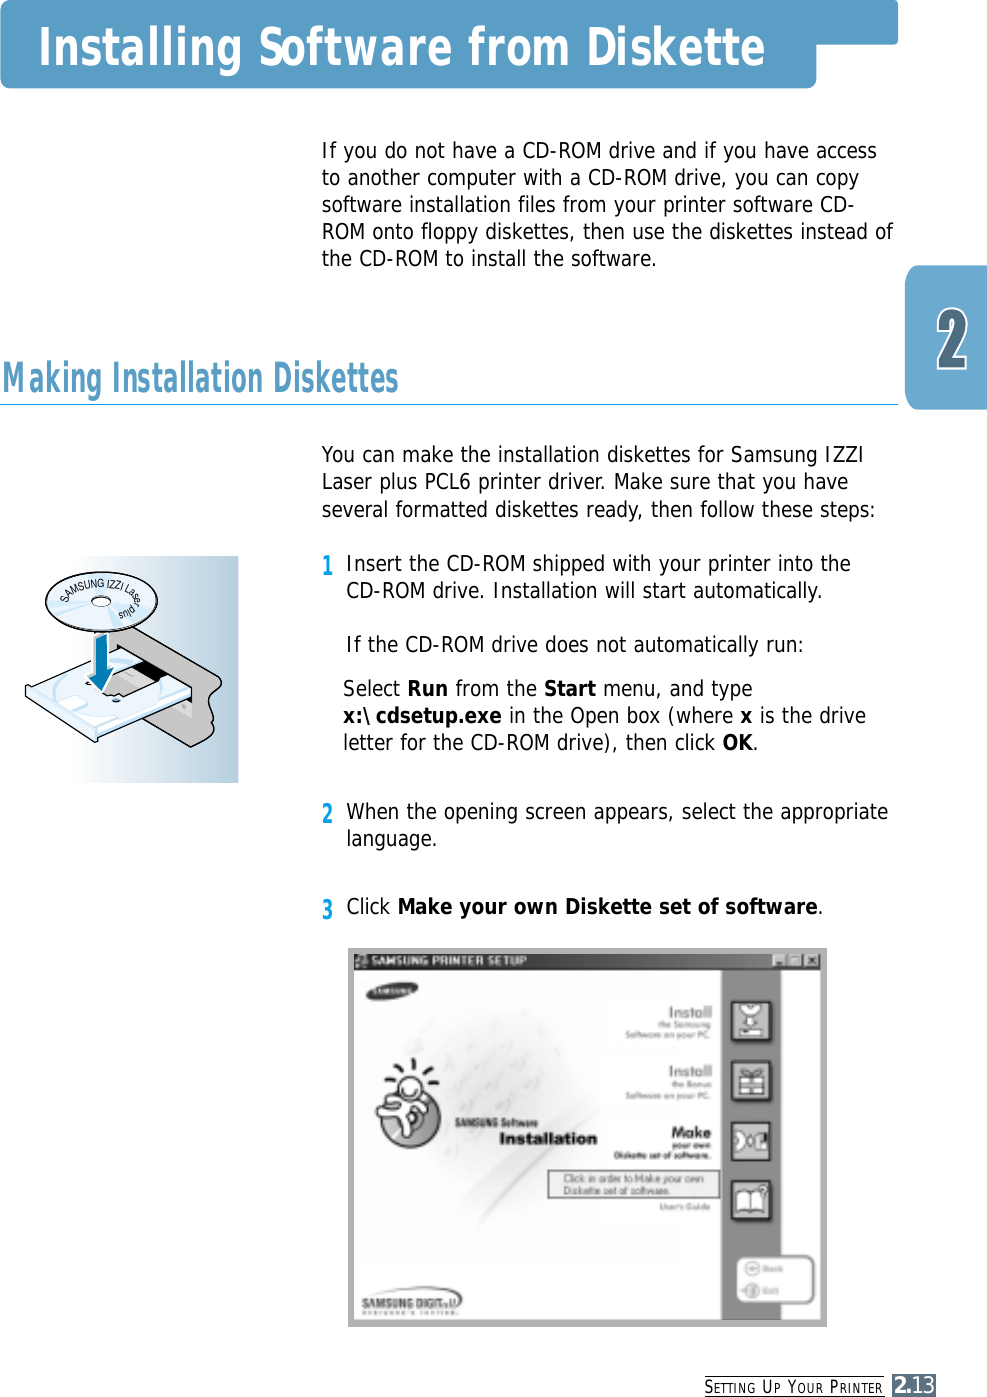 SETTING UPYOUR PRINTER2.13If you do not have a CD-ROM drive and if you have accessto another computer with a CD-ROM drive, you can copysoftware installation files from your printer software CD-ROM onto floppy diskettes, then use the diskettes instead ofthe CD-ROM to install the software.You can make the installation diskettes for Samsung IZZILaser plus PCL6 printer driver. Make sure that you haveseveral formatted diskettes ready, then follow these steps:1Insert the CD-ROM shipped with your printer into the CD-ROM drive. Installation will start automatically.If the CD-ROM drive does not automatically run:Select Run from the Start menu, and typex:\cdsetup.exe in the Open box (where xis the driveletter for the CD-ROM drive), then click OK.2When the opening screen appears, select the appropriatelanguage.3Click Make your own Diskette set of software.Making Installation DiskettesSAMSUNGIZZILaserplusInstalling Software from Diskette